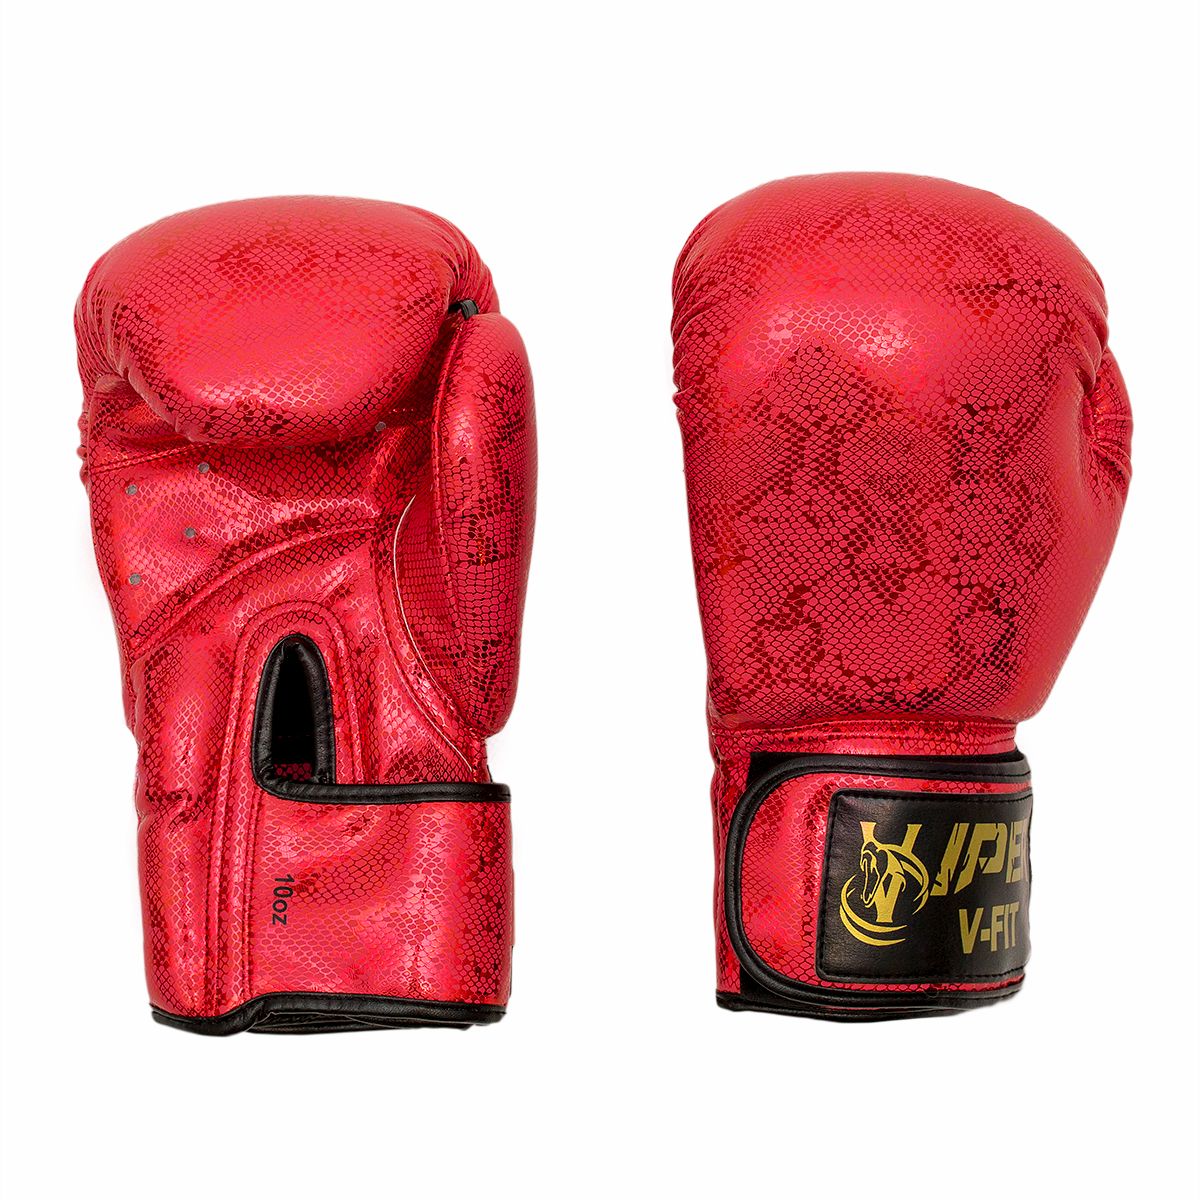 Viper Leather Boxing Gloves Adult Girls Boys Men Sparring Training Kick Boxing Muay Thai Red